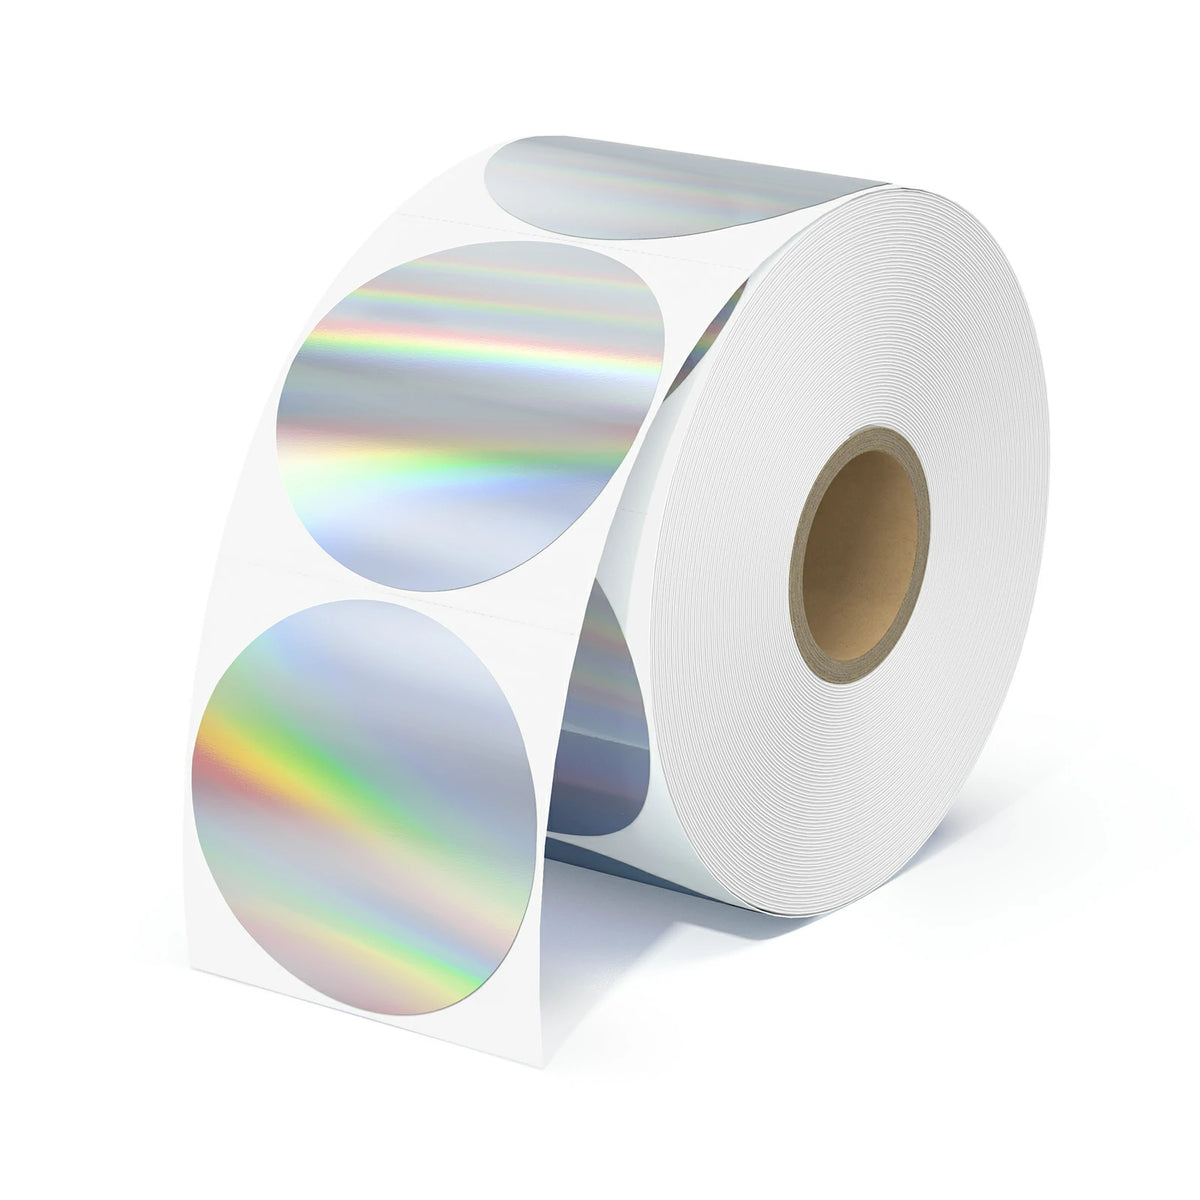 MUNBYN holographic circle thermal labels are made from high-quality materials that ensure durability and longevity.